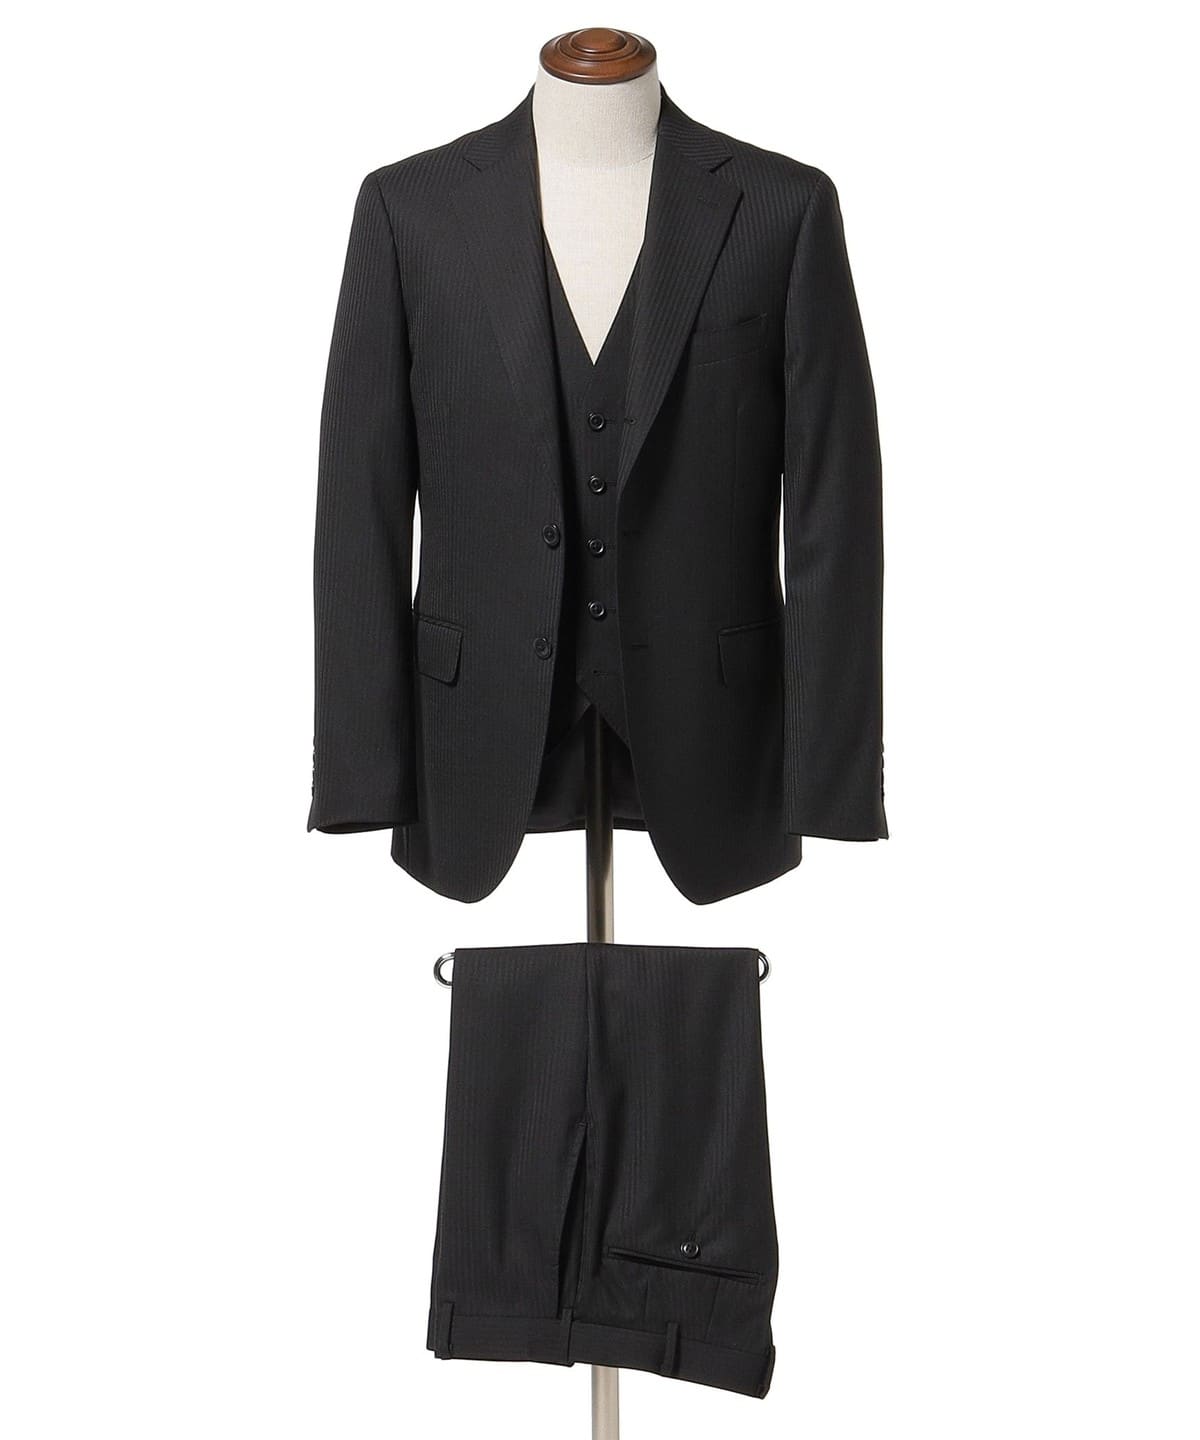 [Outlet] BEAMS HEART / Herringbone stretch 3 button 3 piece suit